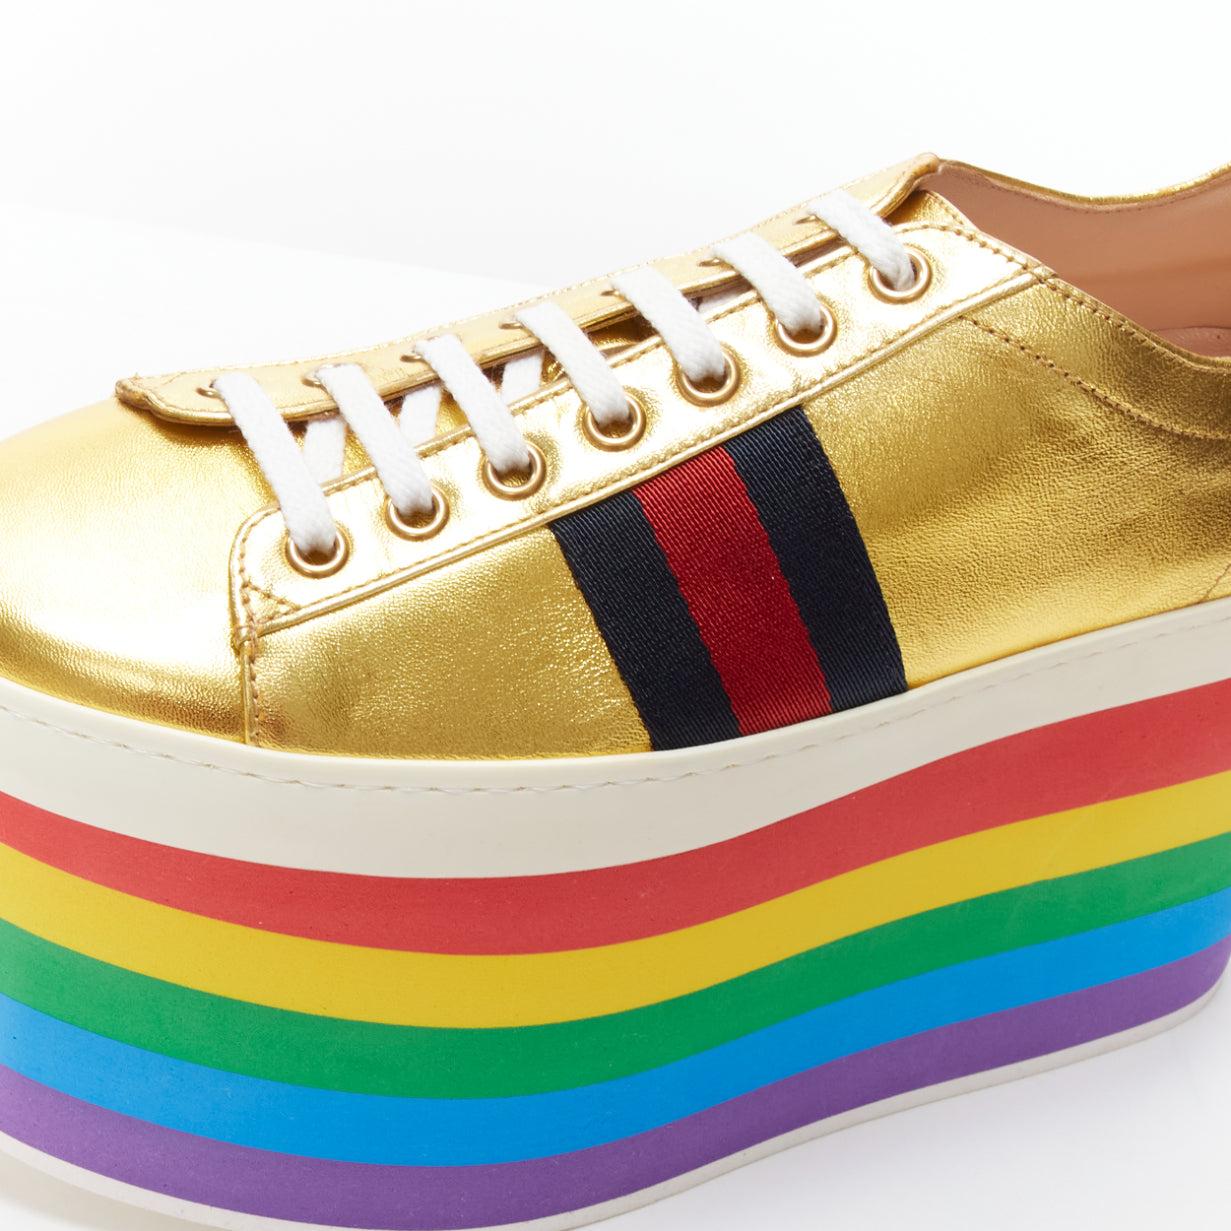 GUCCI Alessandro Michele Peggy rainbow gold web platform sneakers EU37.5 For Sale 2